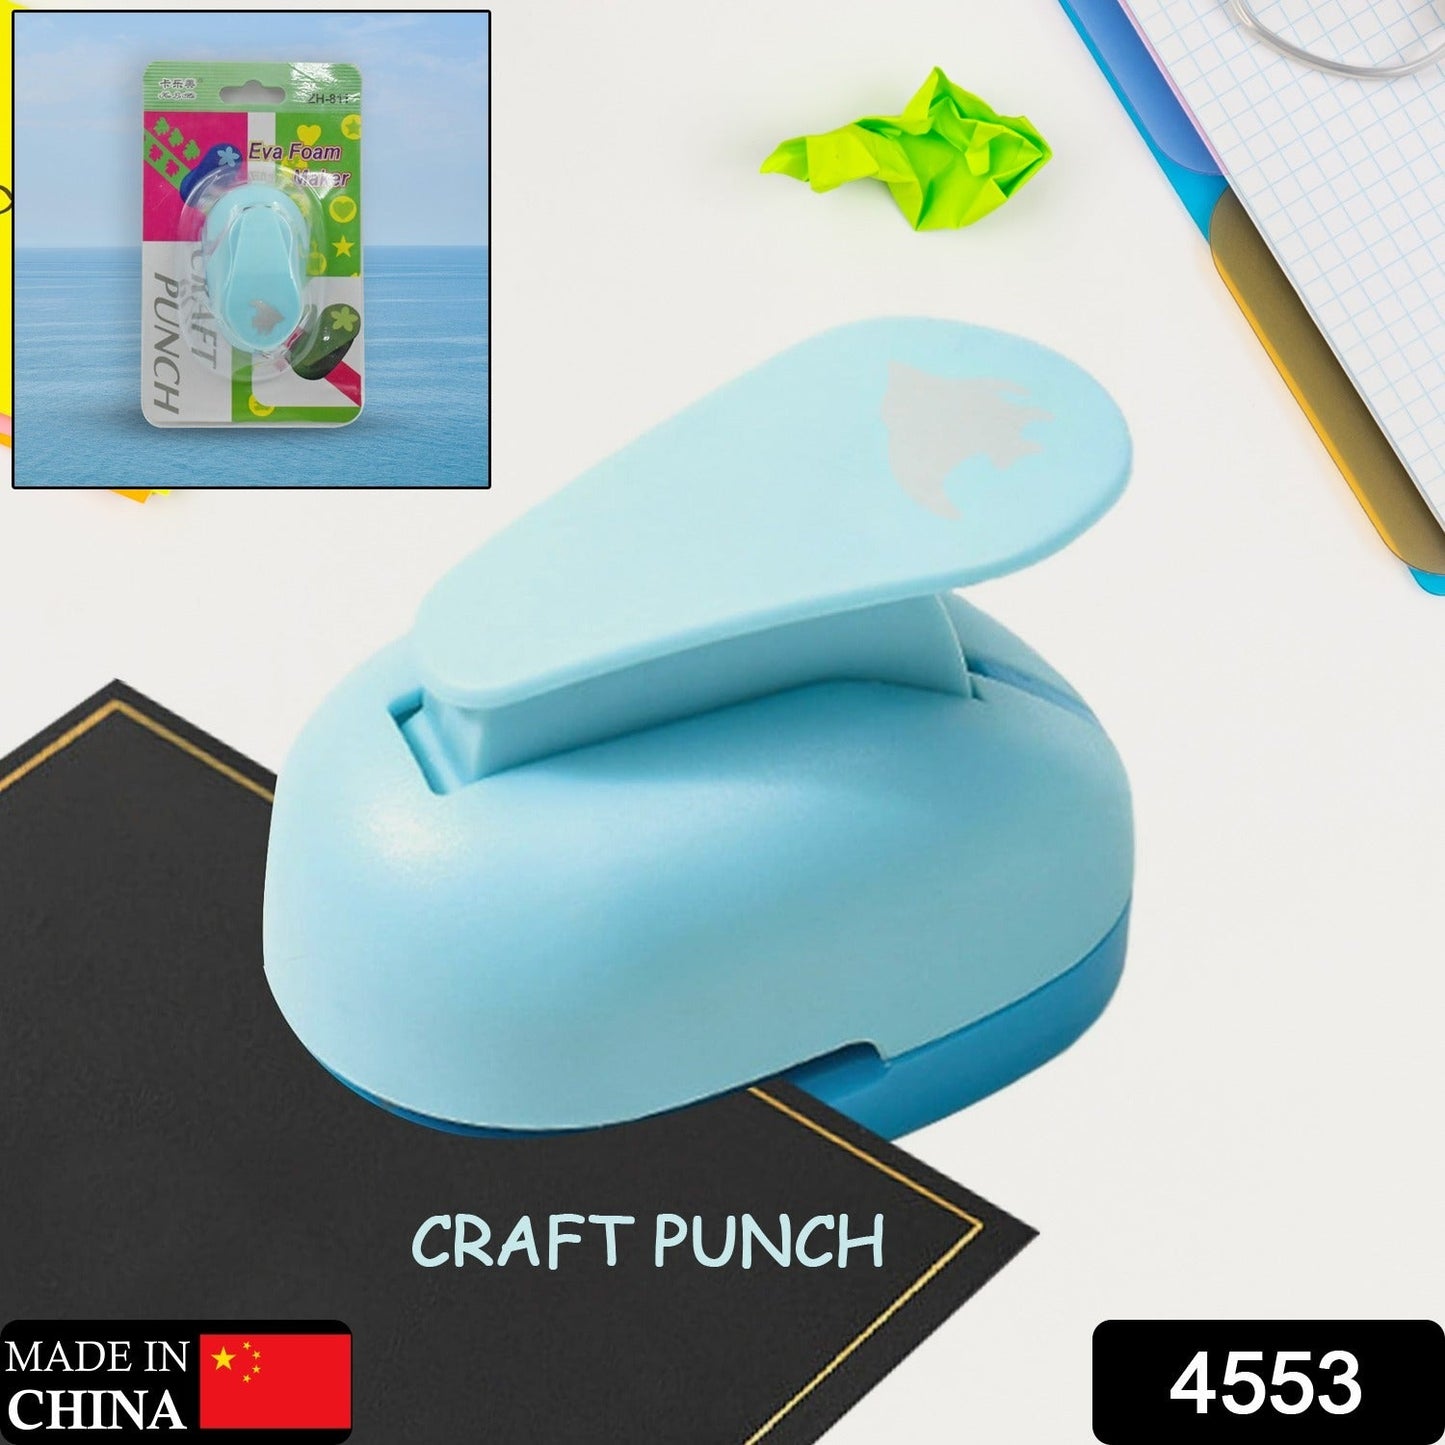 4553 Hole Punch, Kids Paper Craft Punches Decorative, Hole Puncher for Crafting Scrapbook Nail Designs, for Kids Adults